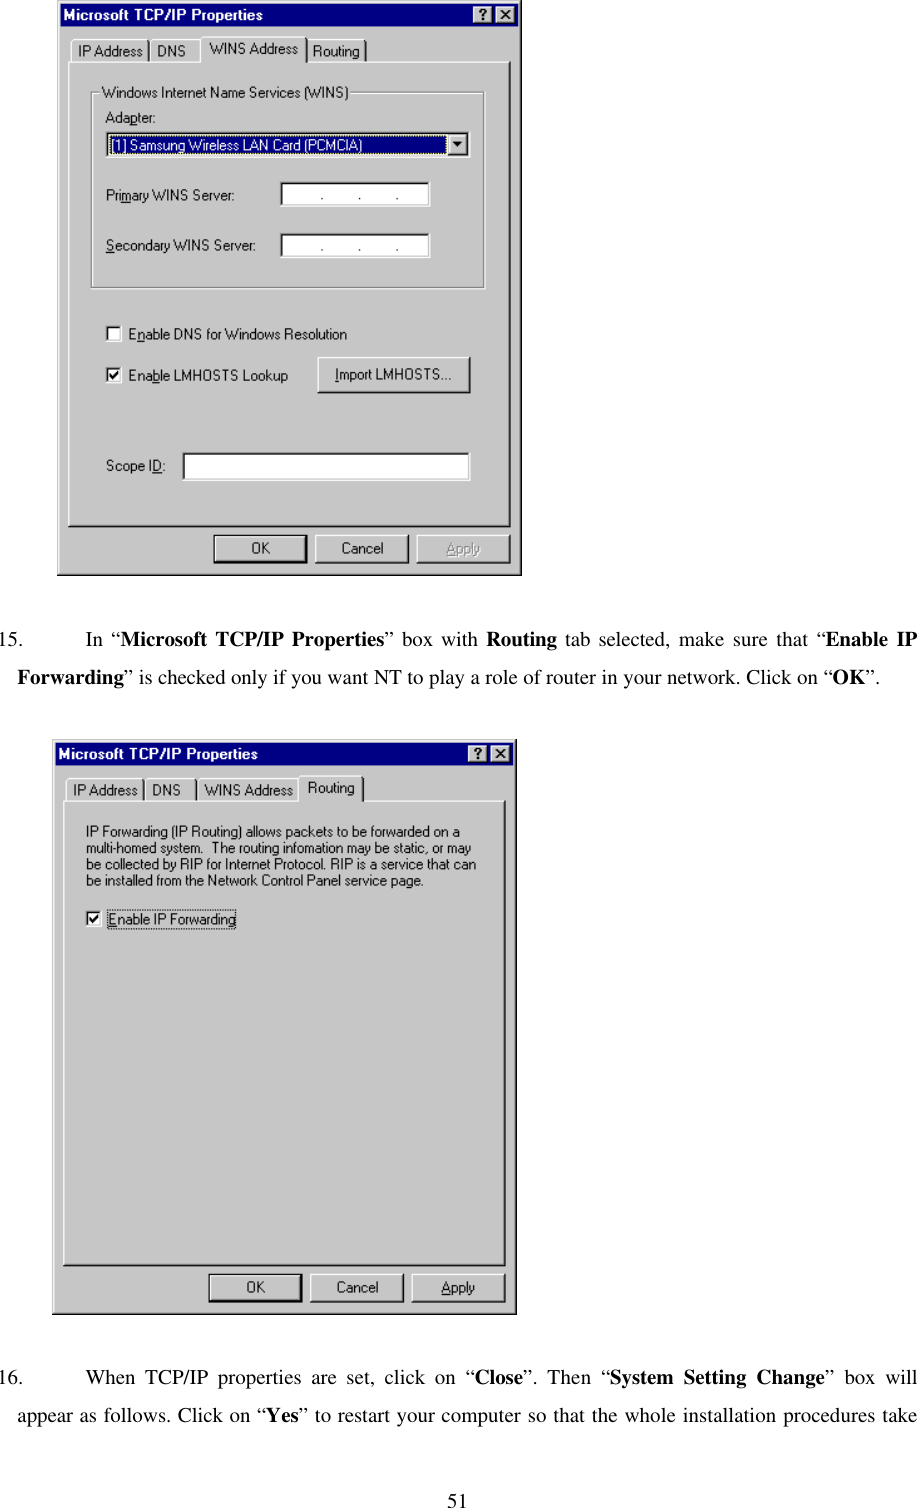 51           15. In “Microsoft TCP/IP Properties” box with Routing tab selected, make sure that “Enable IPForwarding” is checked only if you want NT to play a role of router in your network. Click on “OK”.          16. When TCP/IP properties are set, click on “Close”. Then “System Setting Change” box willappear as follows. Click on “Yes” to restart your computer so that the whole installation procedures take